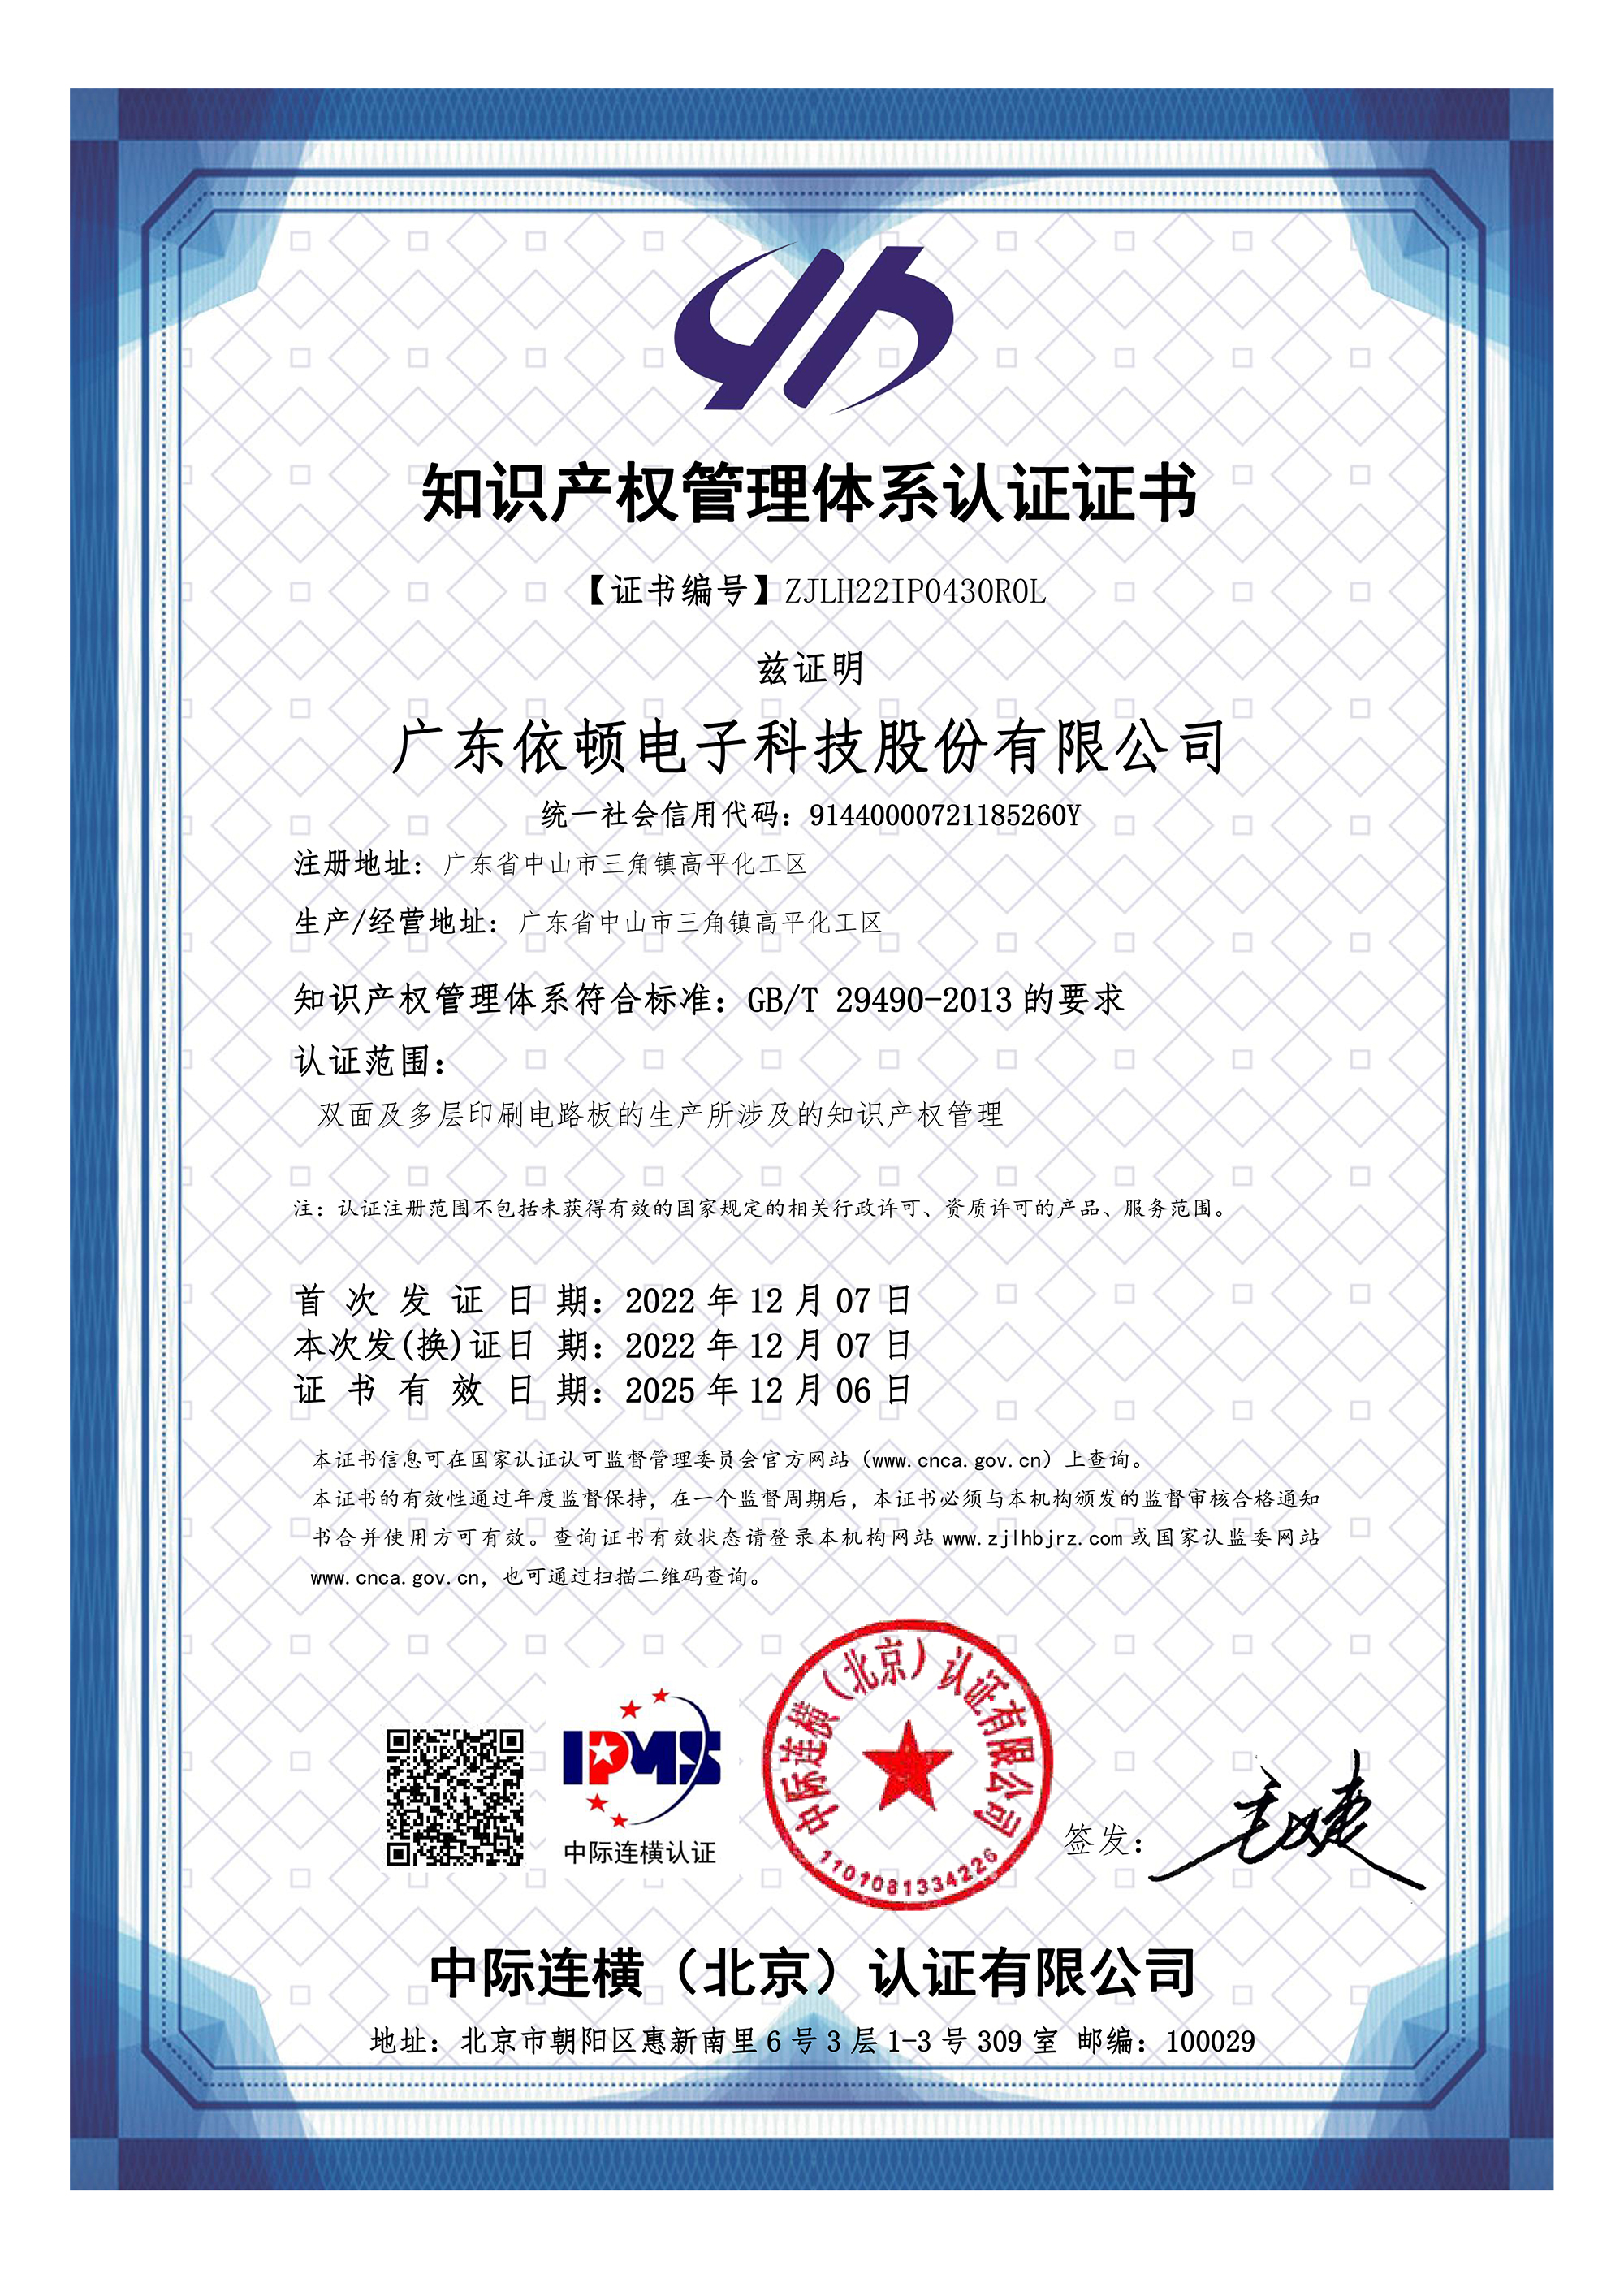 Intellectual Property Management System Certification